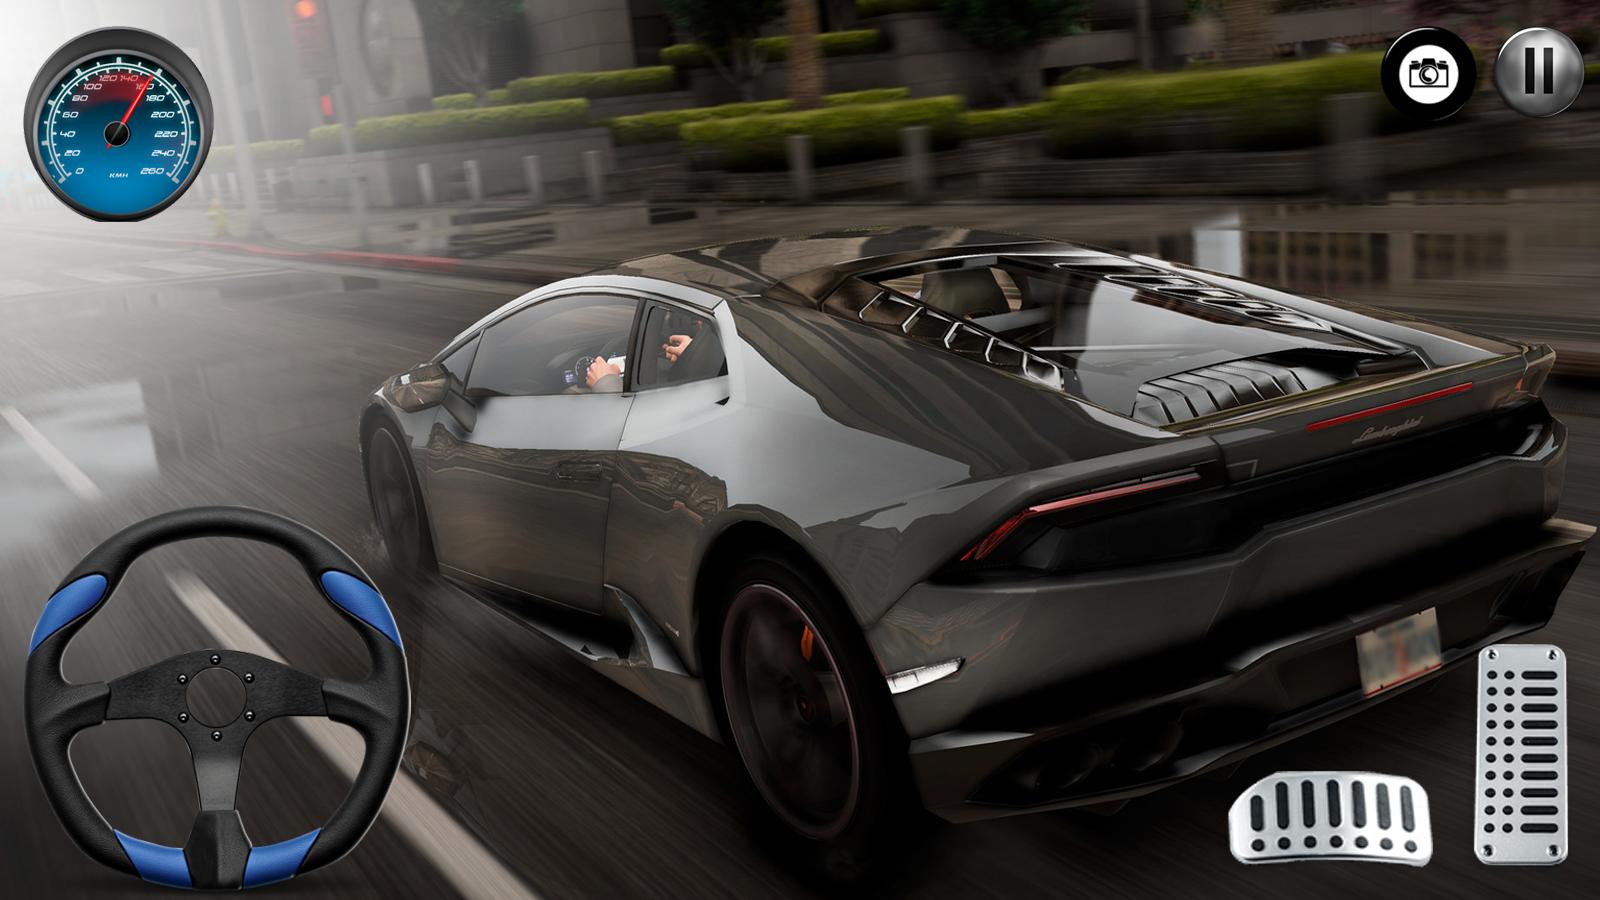 F1 Lamborghini Huracan Self Drive Academy For Android Apk Download